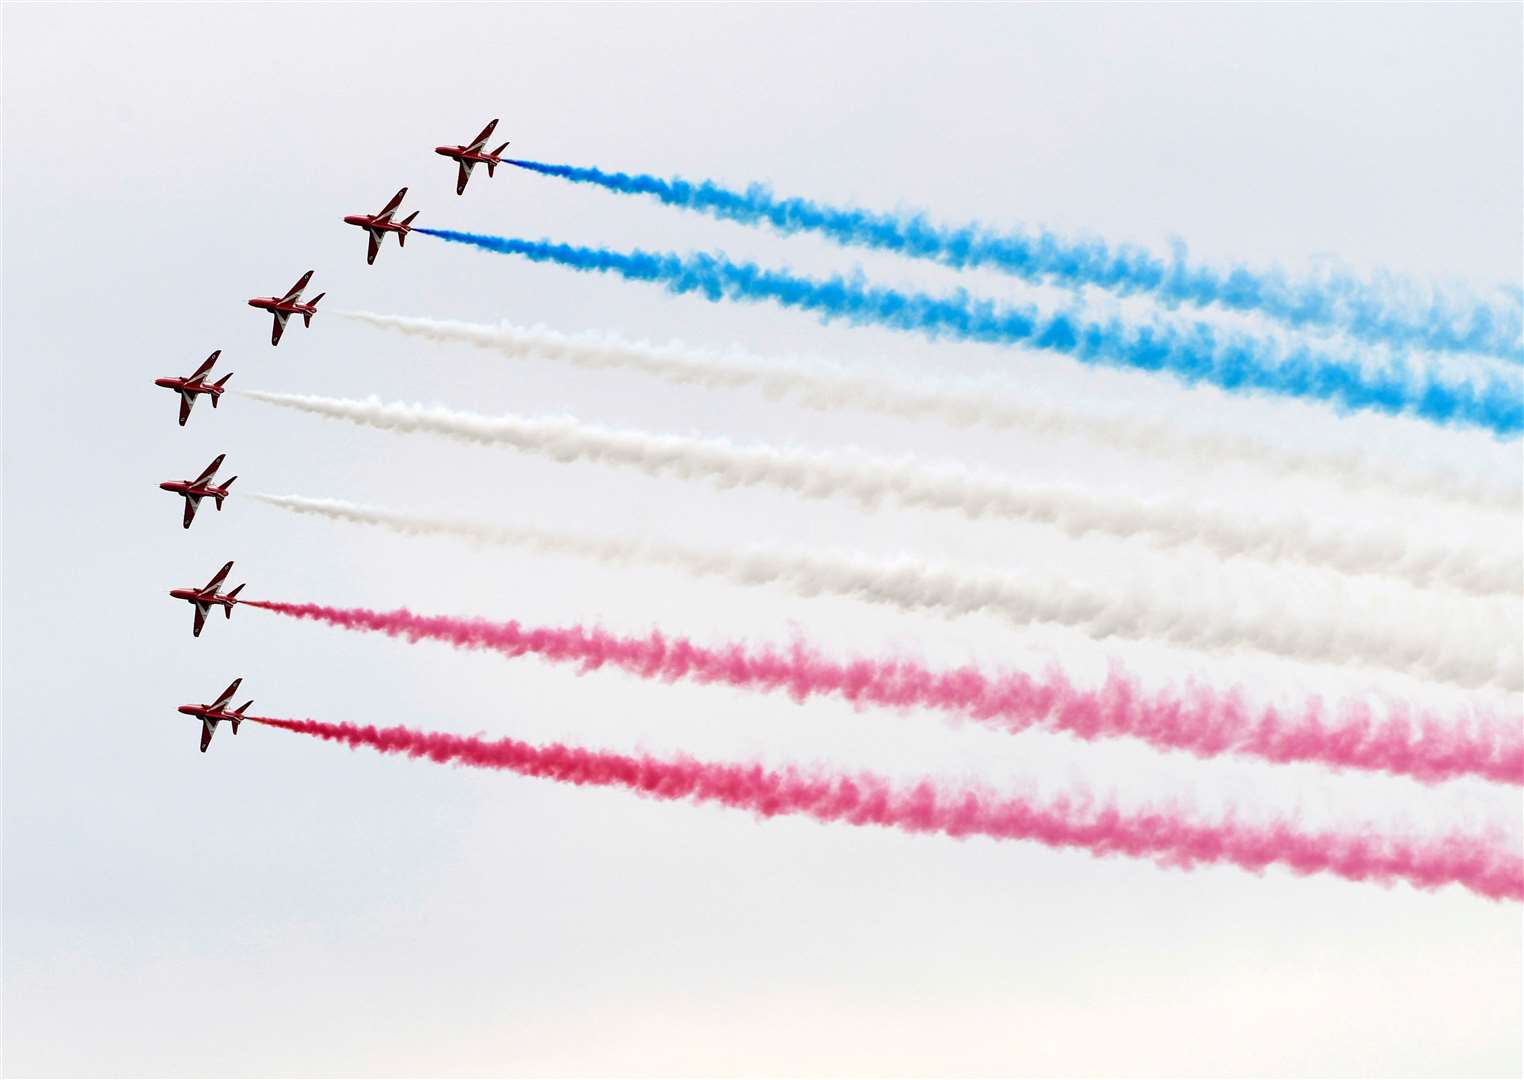 The Red Arrows are expected to fly over London on Saturday. Picture: Barry Goodwin.